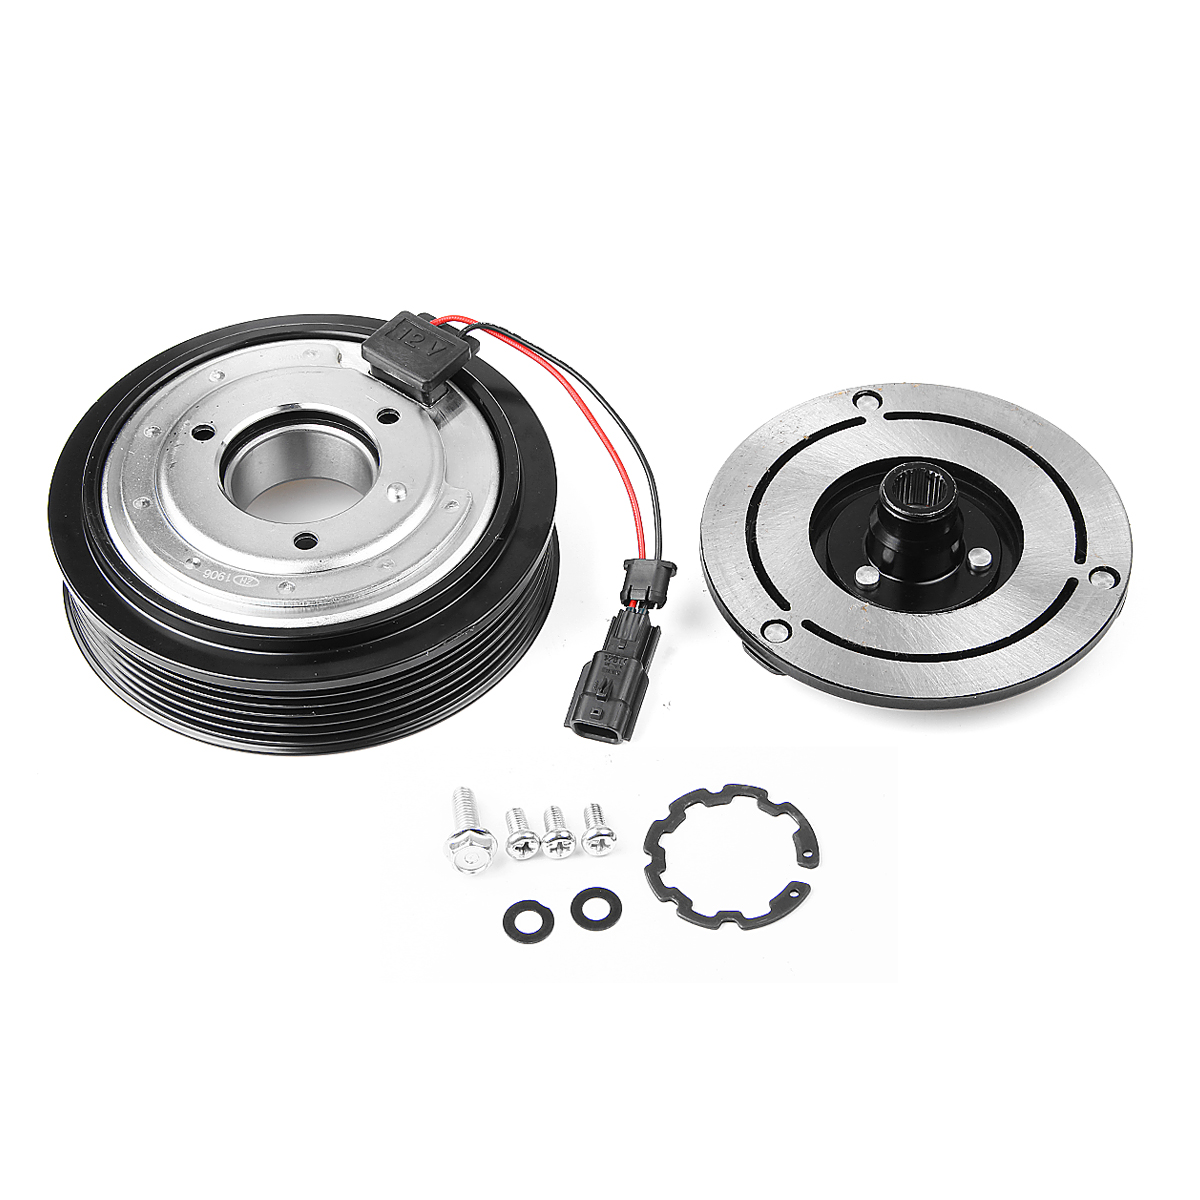 

AC Compressor Clutch Kit Pulley Bearing Coil Plate For Nissan 2008 - 2013